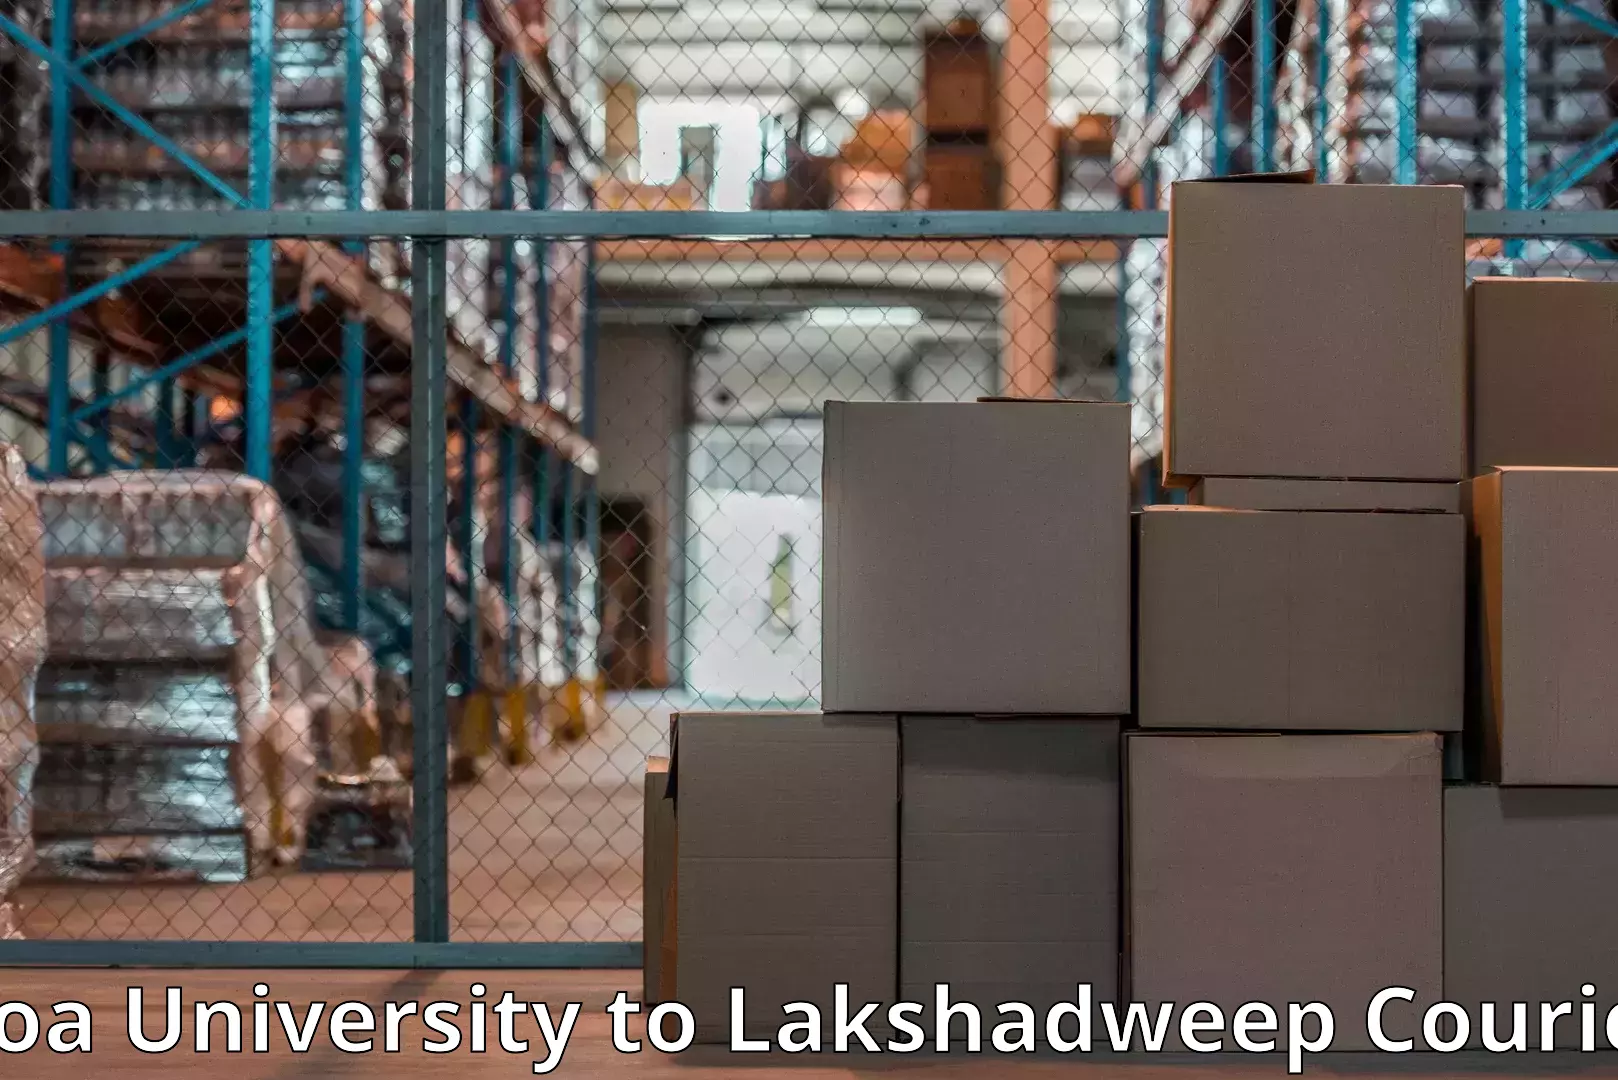 Household goods transport service in Goa University to Lakshadweep